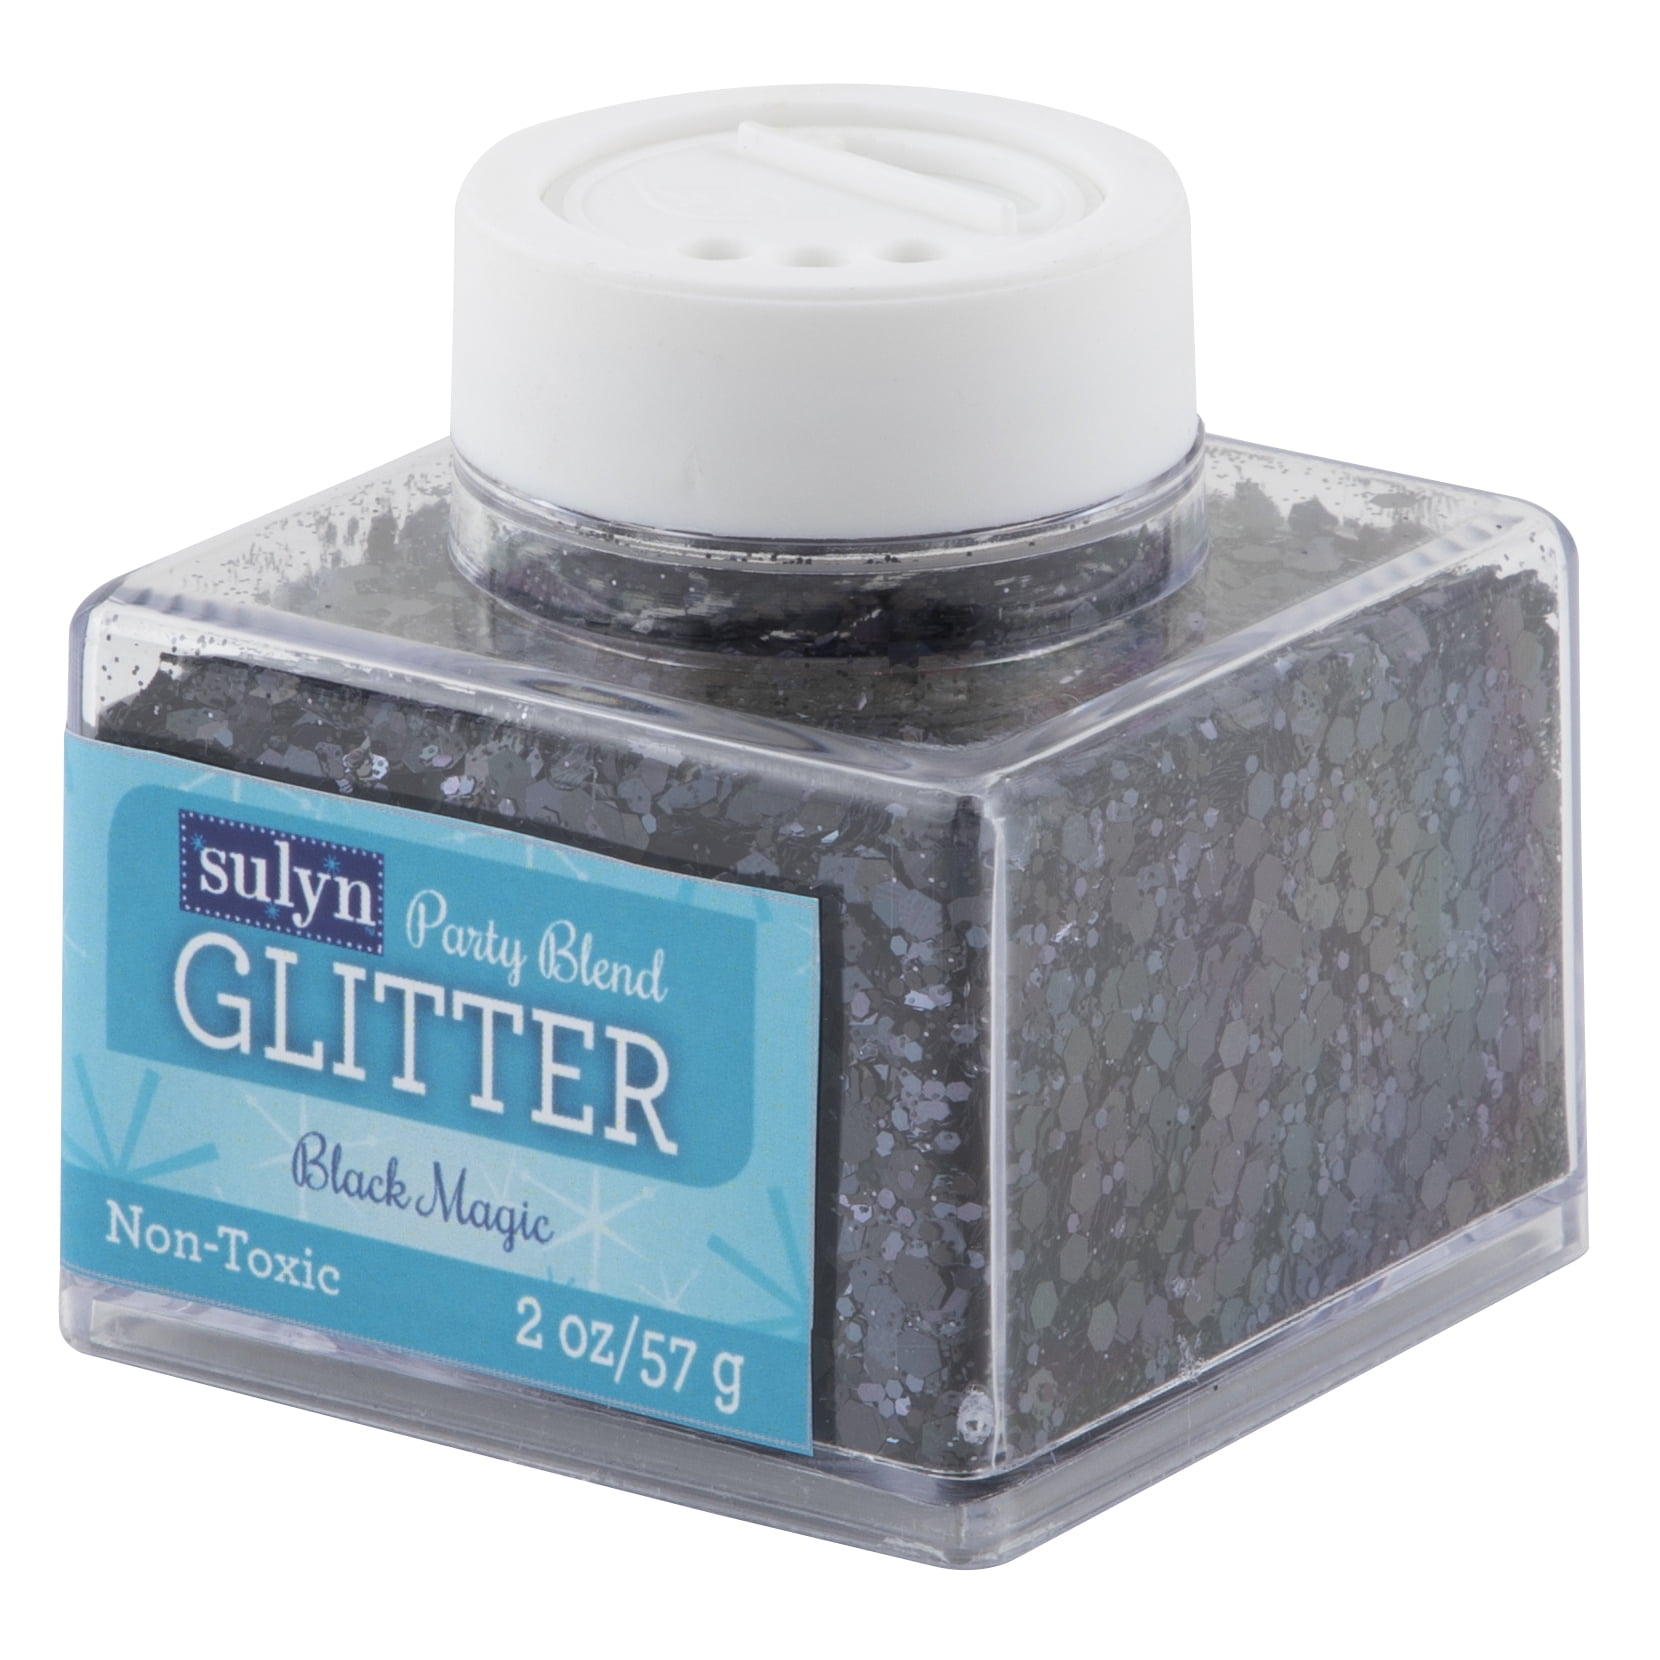 Sulyn Party Blend Glitter for Crafts, Red Hot Fiesta, 2 oz 